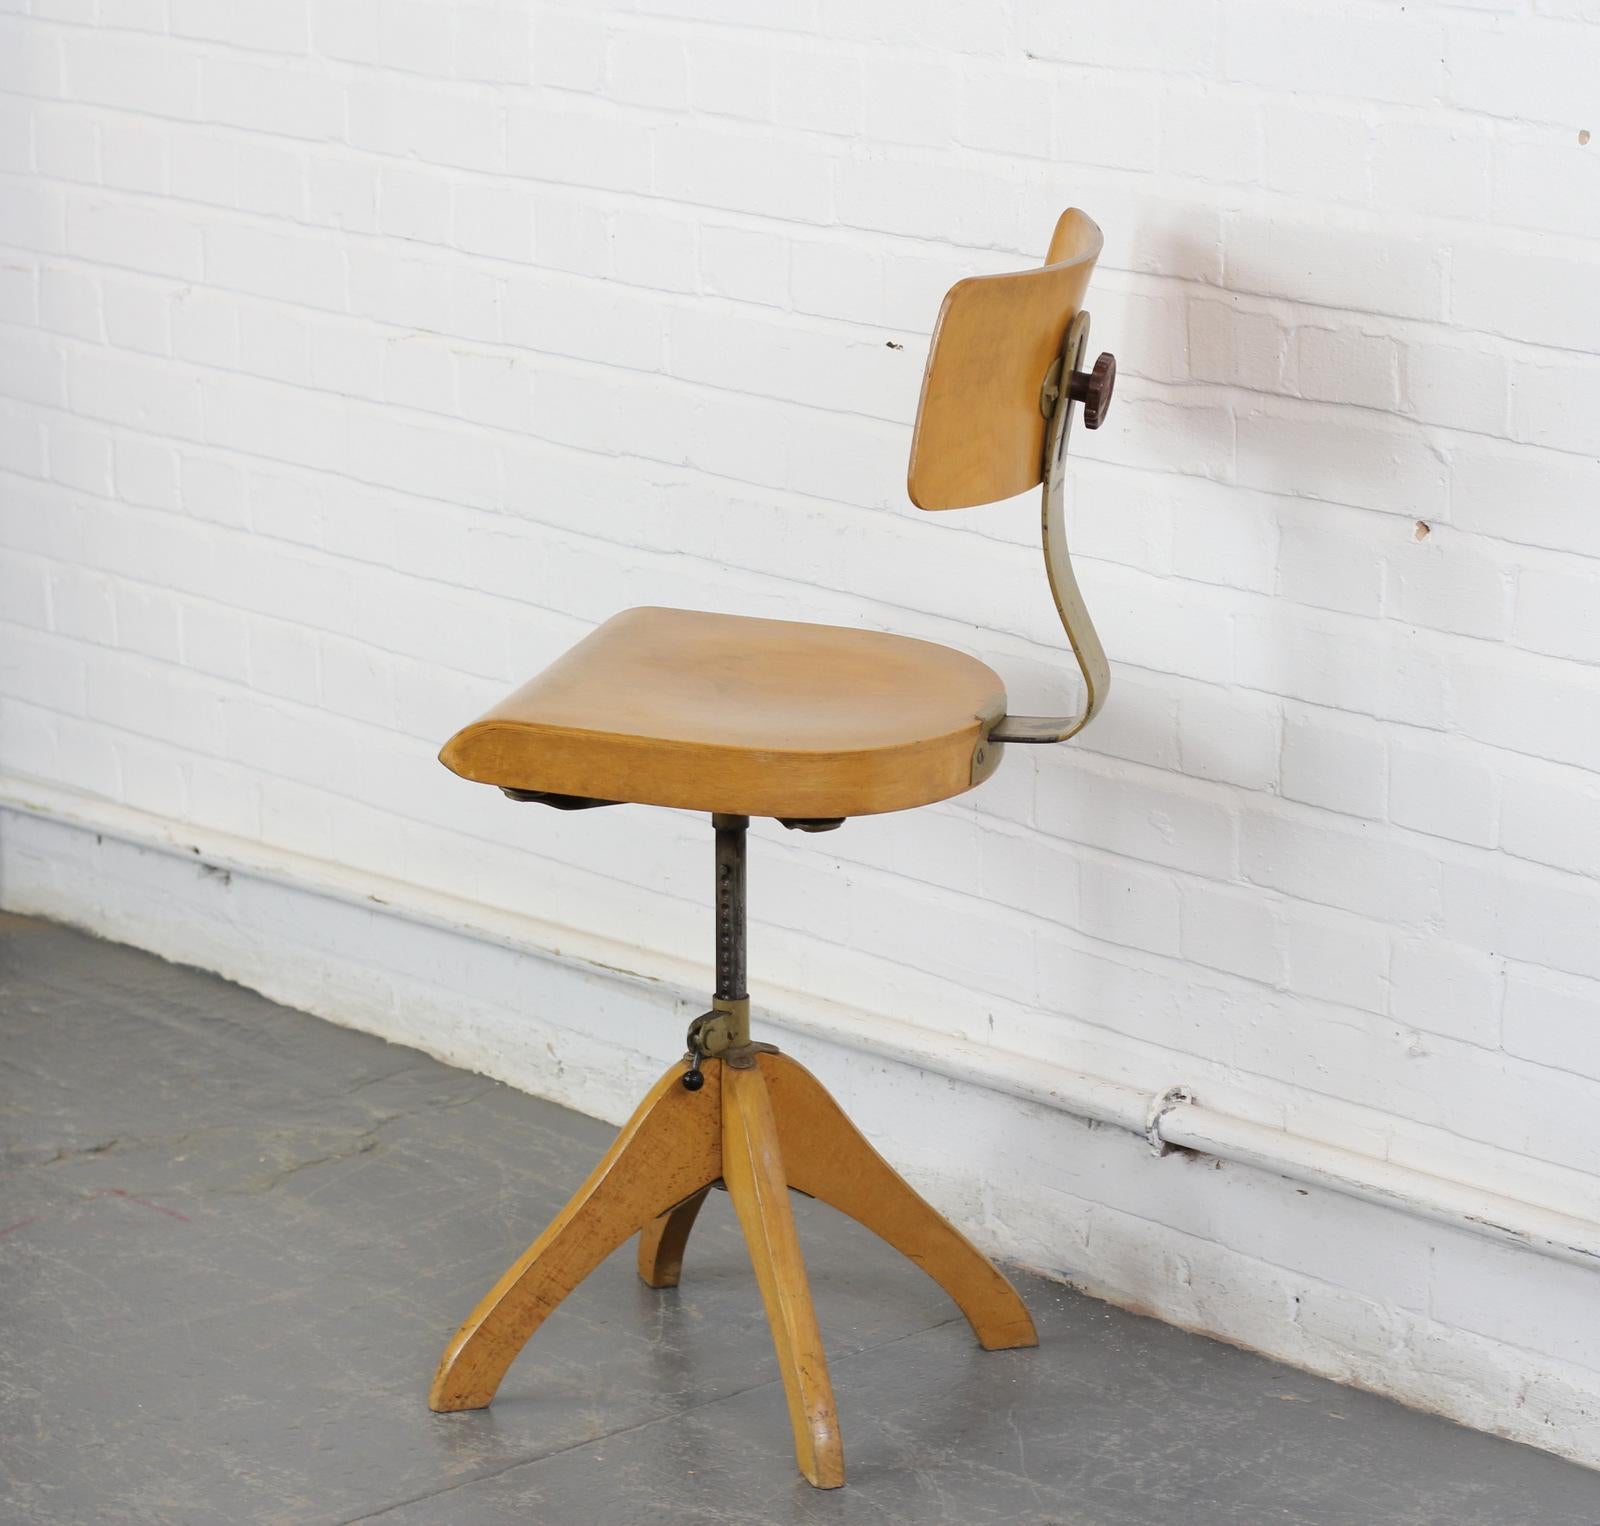 German Machinists chair by Polstergleich, circa 1940s

- Sprung seat and back rest
- Beech seat and back rest
- Height adjustable and turns 360
- German, Circa 1940s
- 40cm wide x 47cm deep x 62cm at it's tallest

Margarete Klöber,